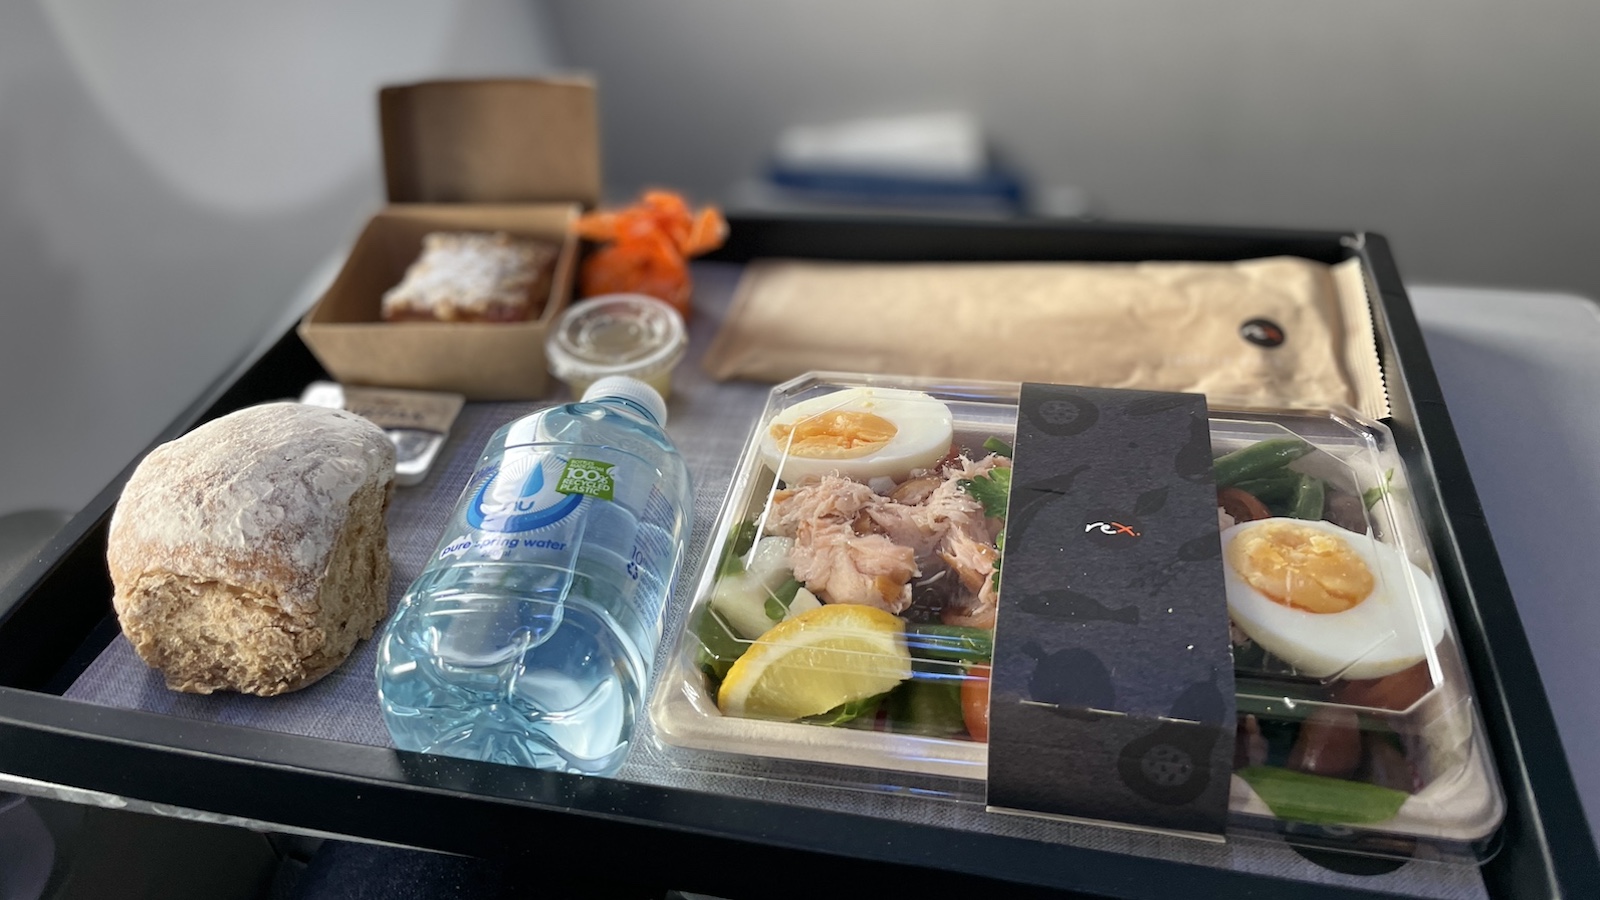 Rex Airlines Brisbane to Sydney Business Class Meal Tuna Salad Point Hacks